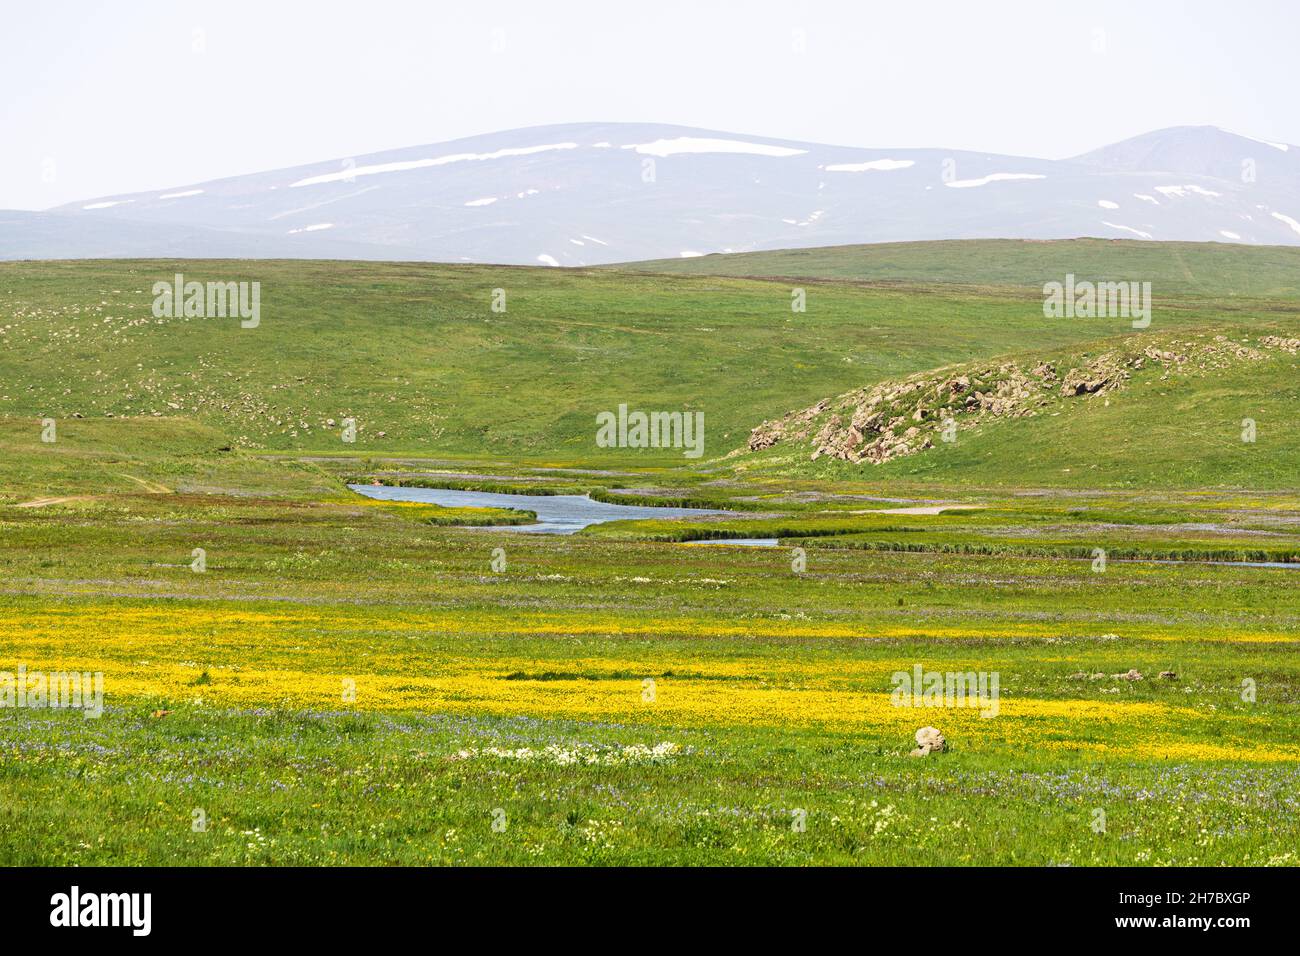 A high-altitude plateau with lush grass and a lake or swamp. The concept of biotope and ecology Stock Photo